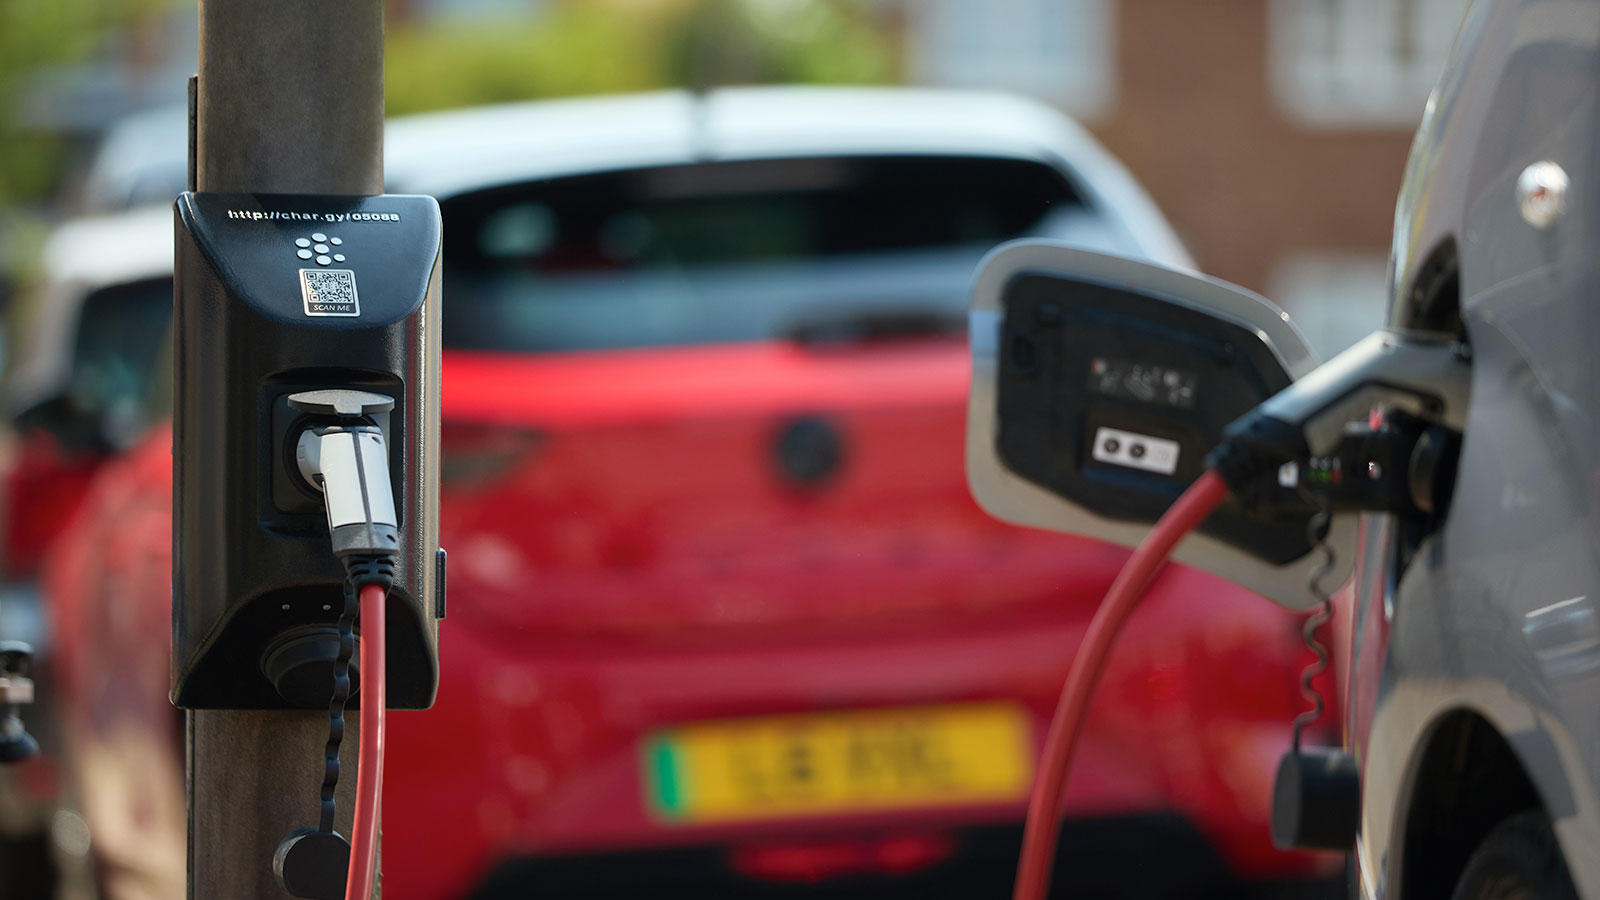 char.gy has installed its 3,000th public electric vehicle charging point